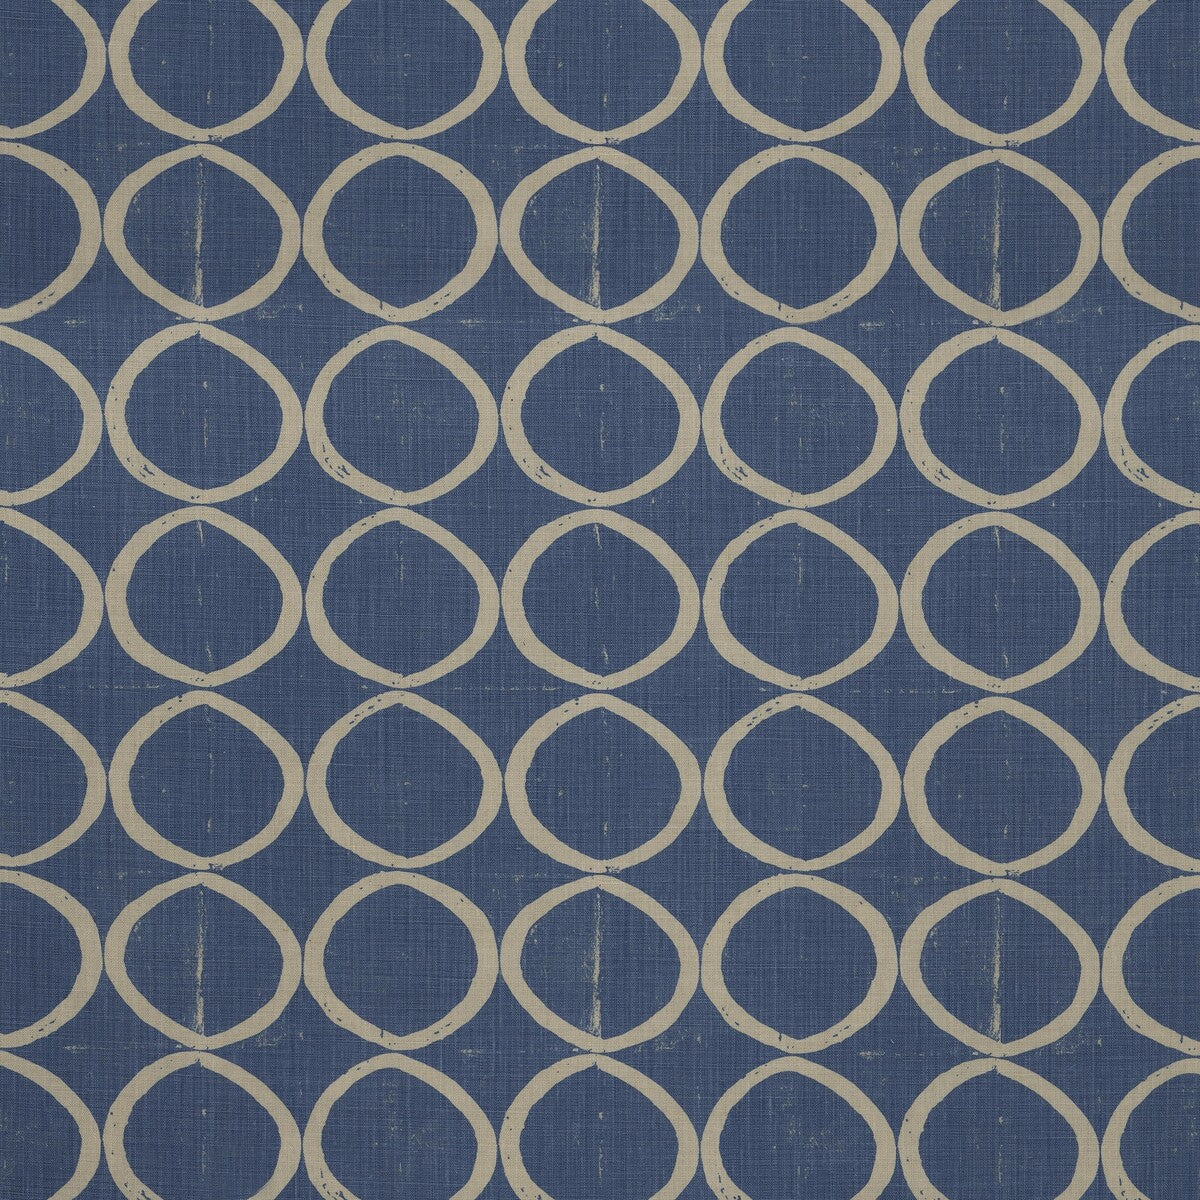 Circles fabric in azure color - pattern BFC-3665.5.0 - by Lee Jofa in the Blithfield collection